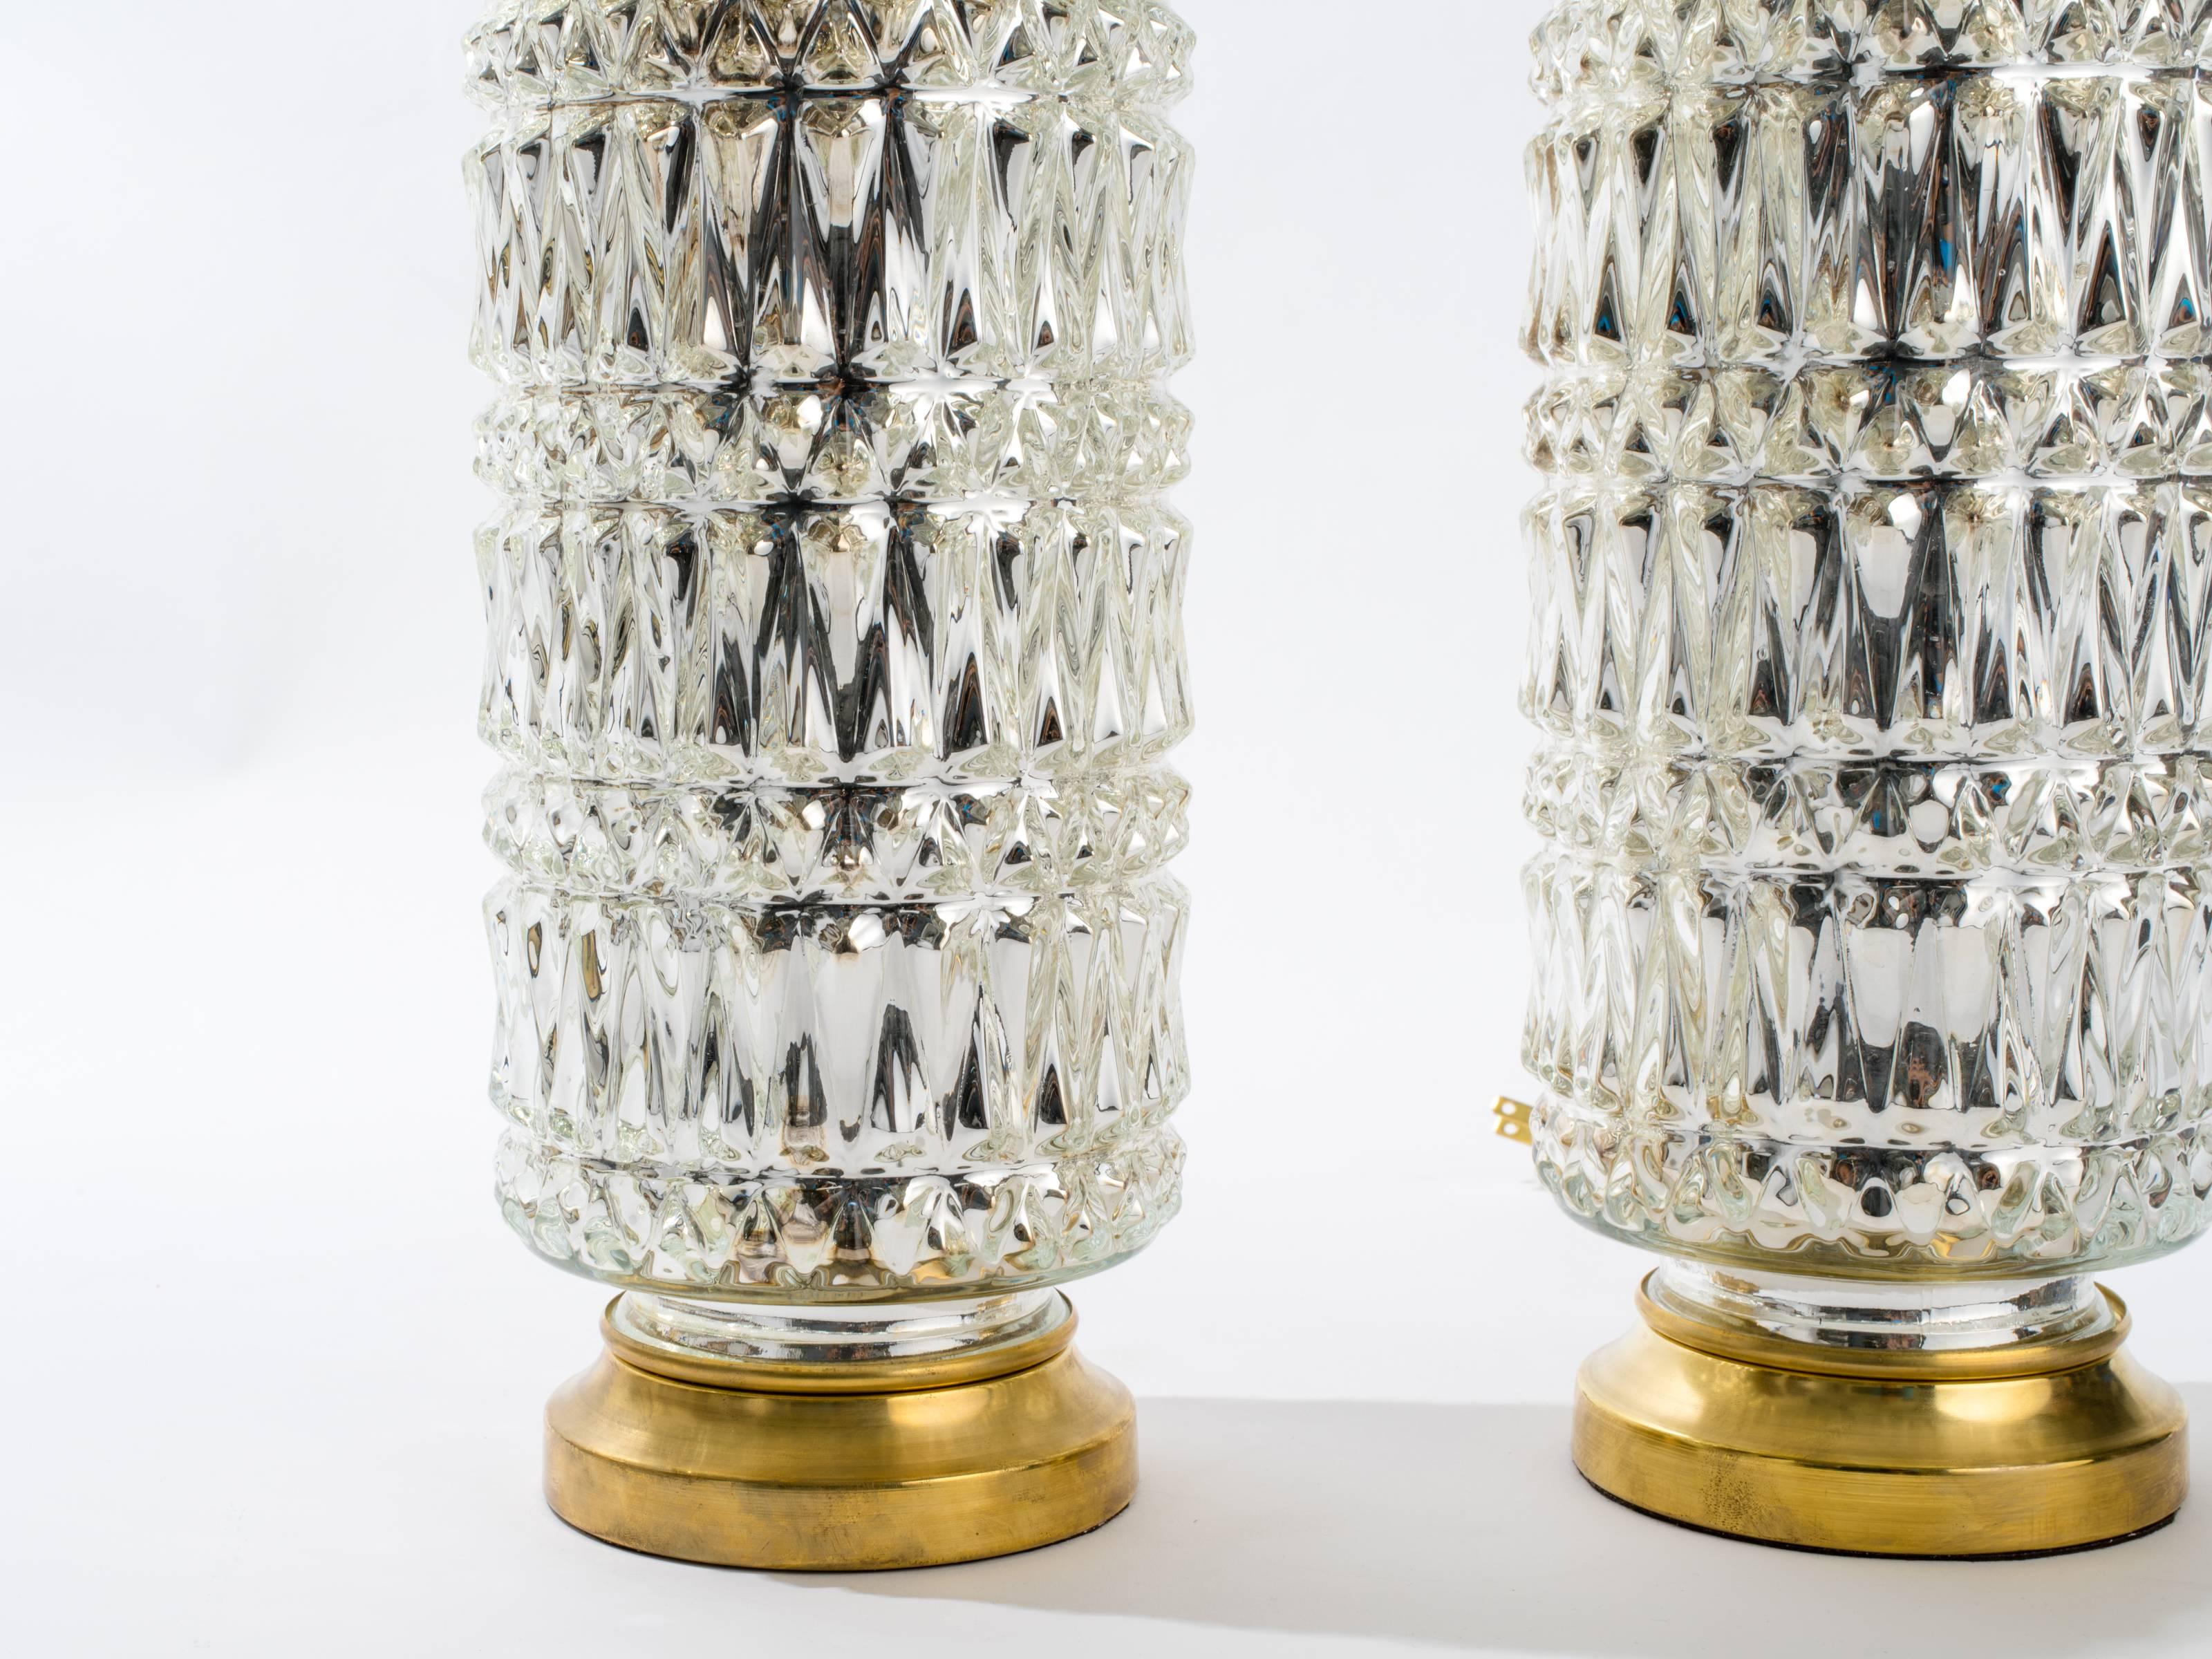 Pressed Textured Mercury Glass Lamps For Sale